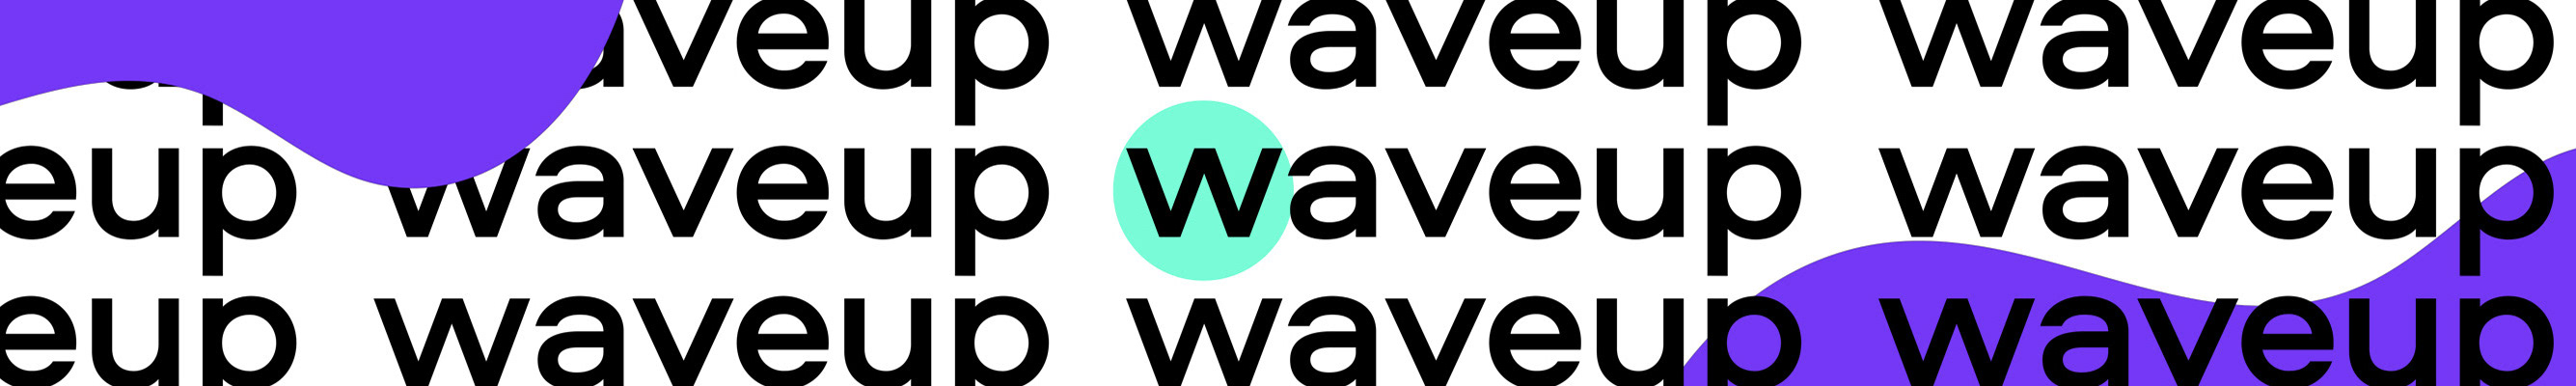 Wave Up's profile banner